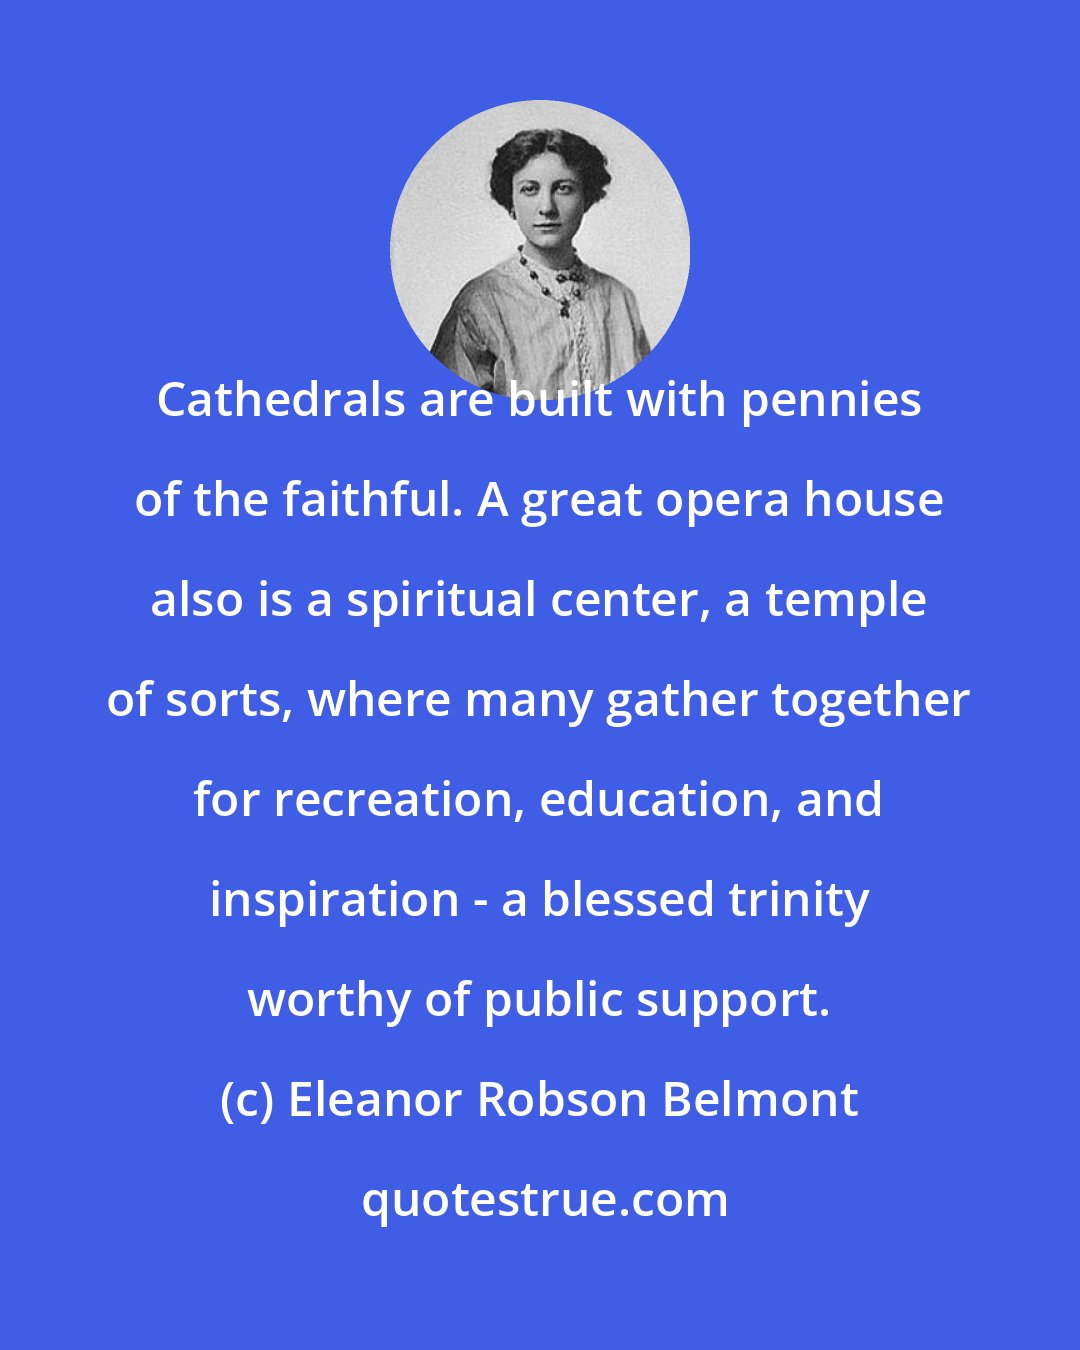 Eleanor Robson Belmont: Cathedrals are built with pennies of the faithful. A great opera house also is a spiritual center, a temple of sorts, where many gather together for recreation, education, and inspiration - a blessed trinity worthy of public support.